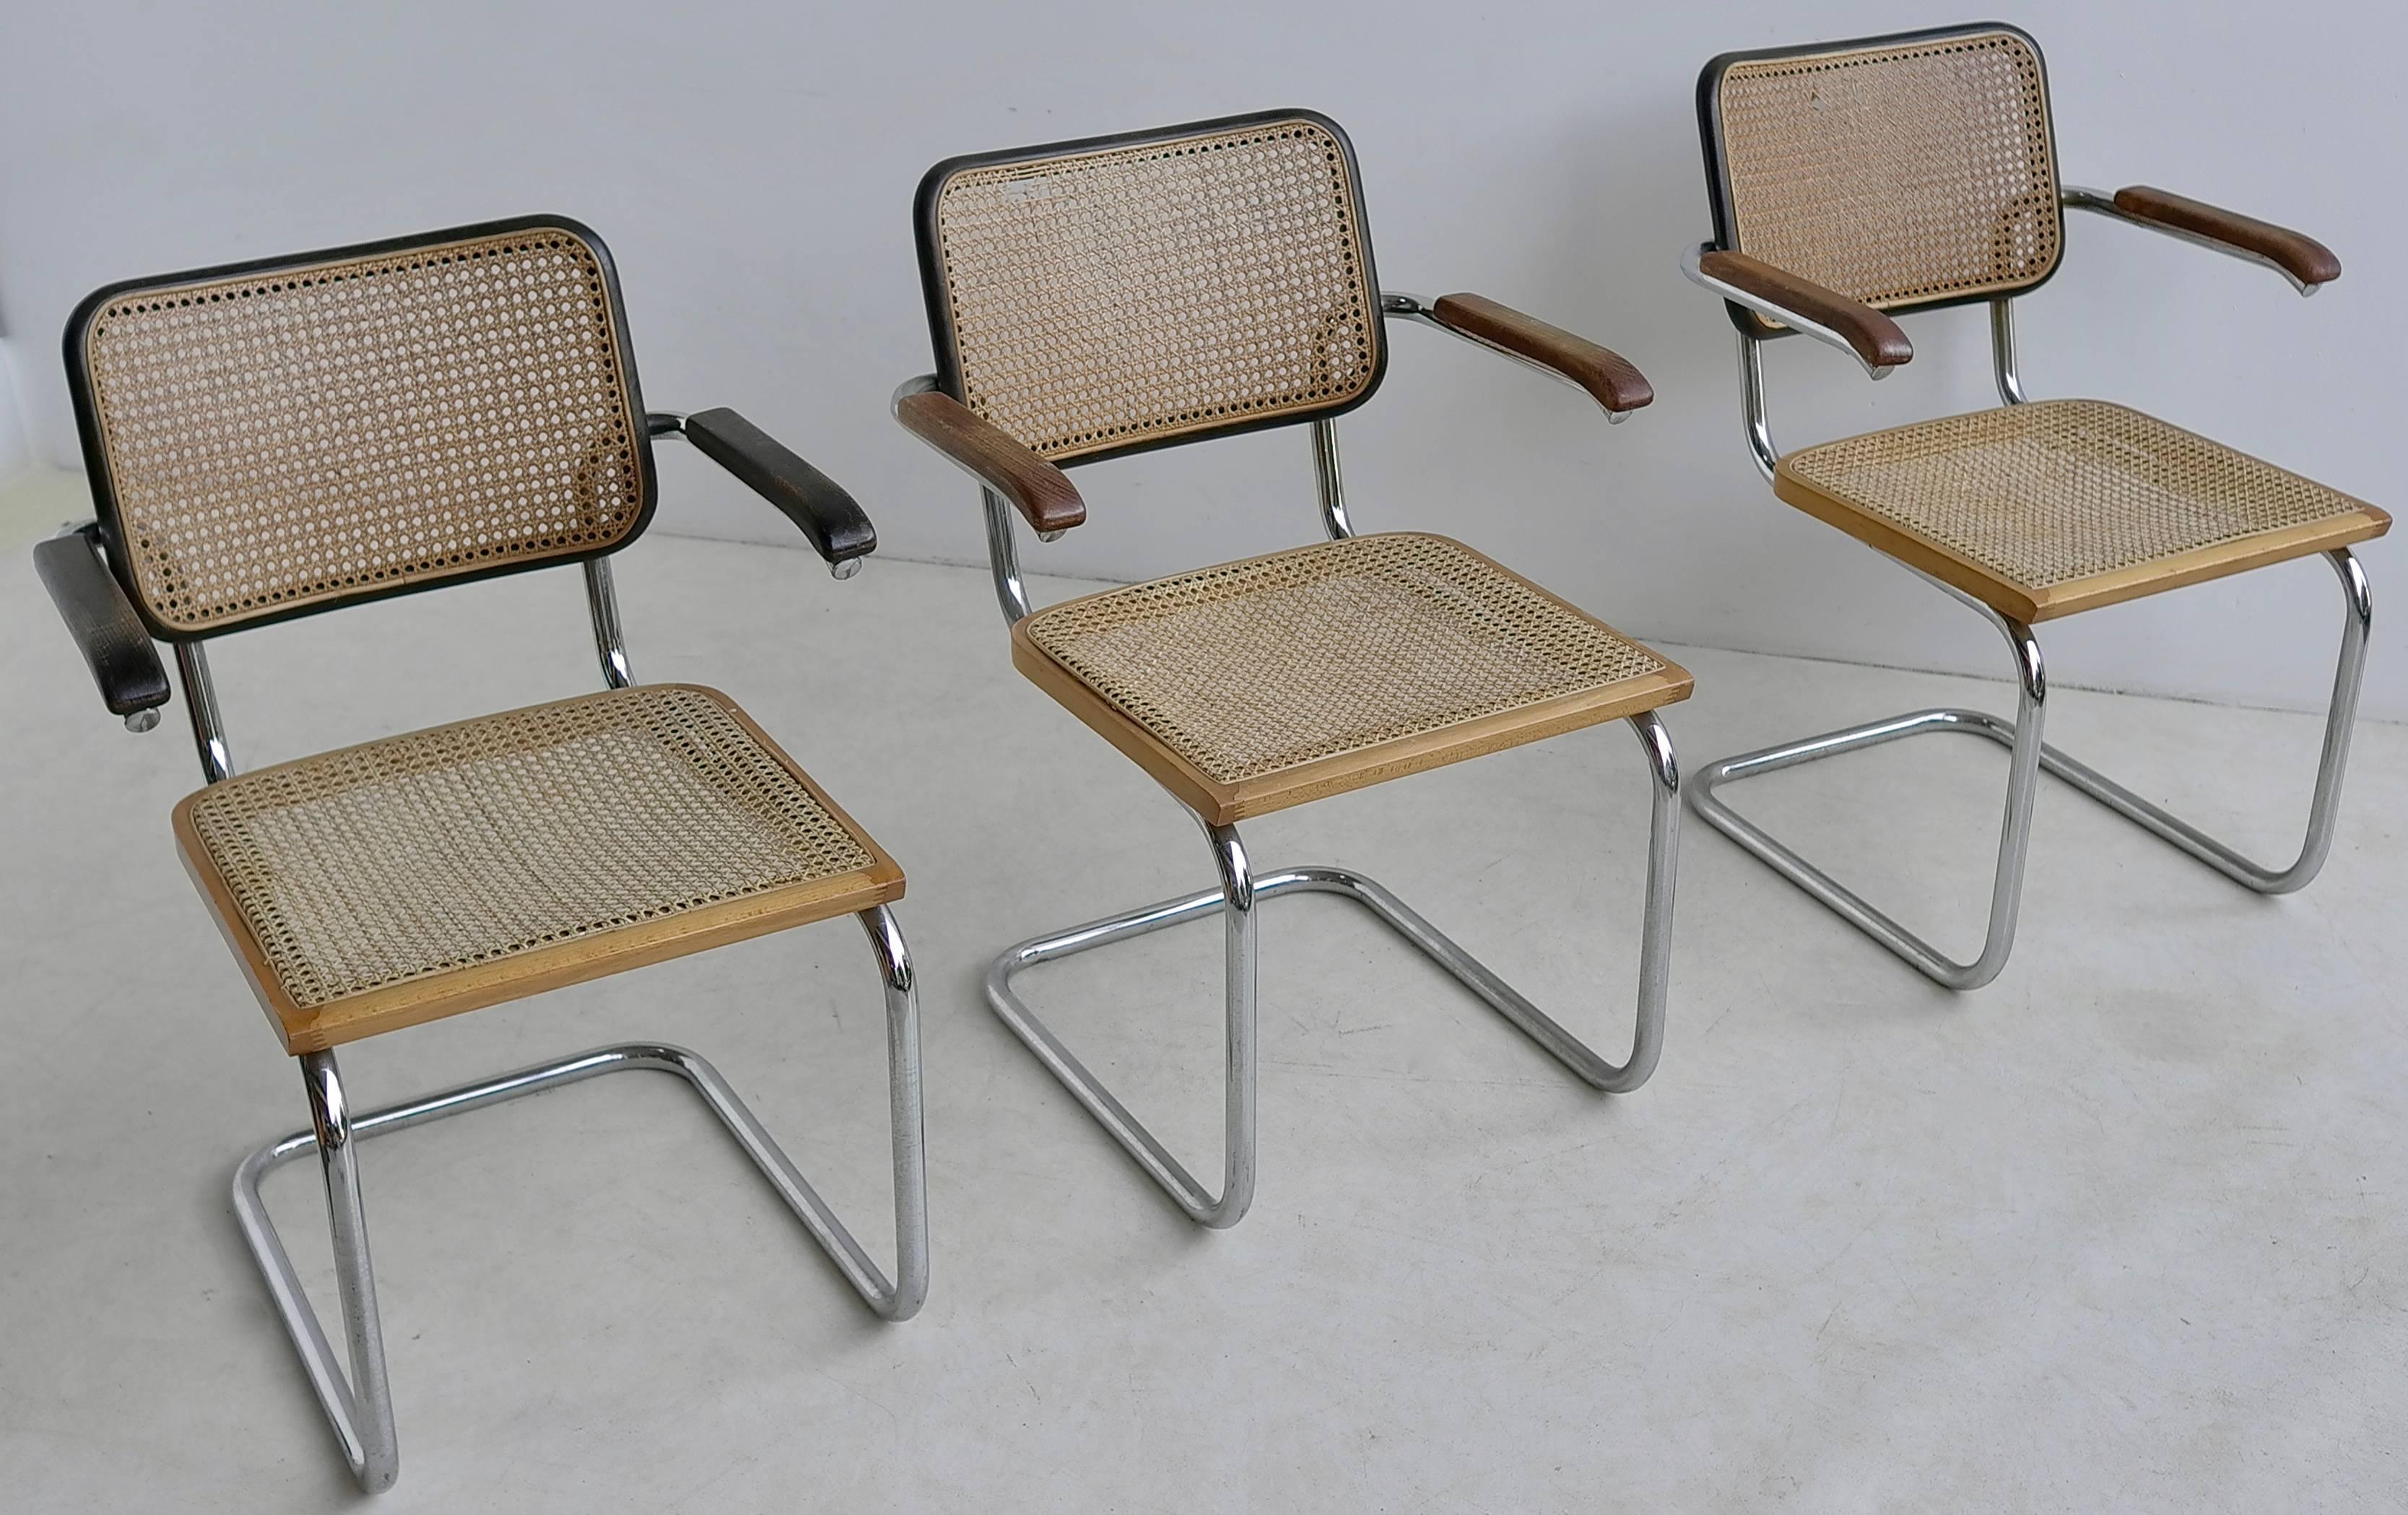 The S64 chair was designed by Marcel Breuer for Thonet in 1929.
These original Thonet chairs are made of chrome-plated tubular steel, dark brown and natural bentwood and a cane finish. Rare in this wood/color combination. These are early produced